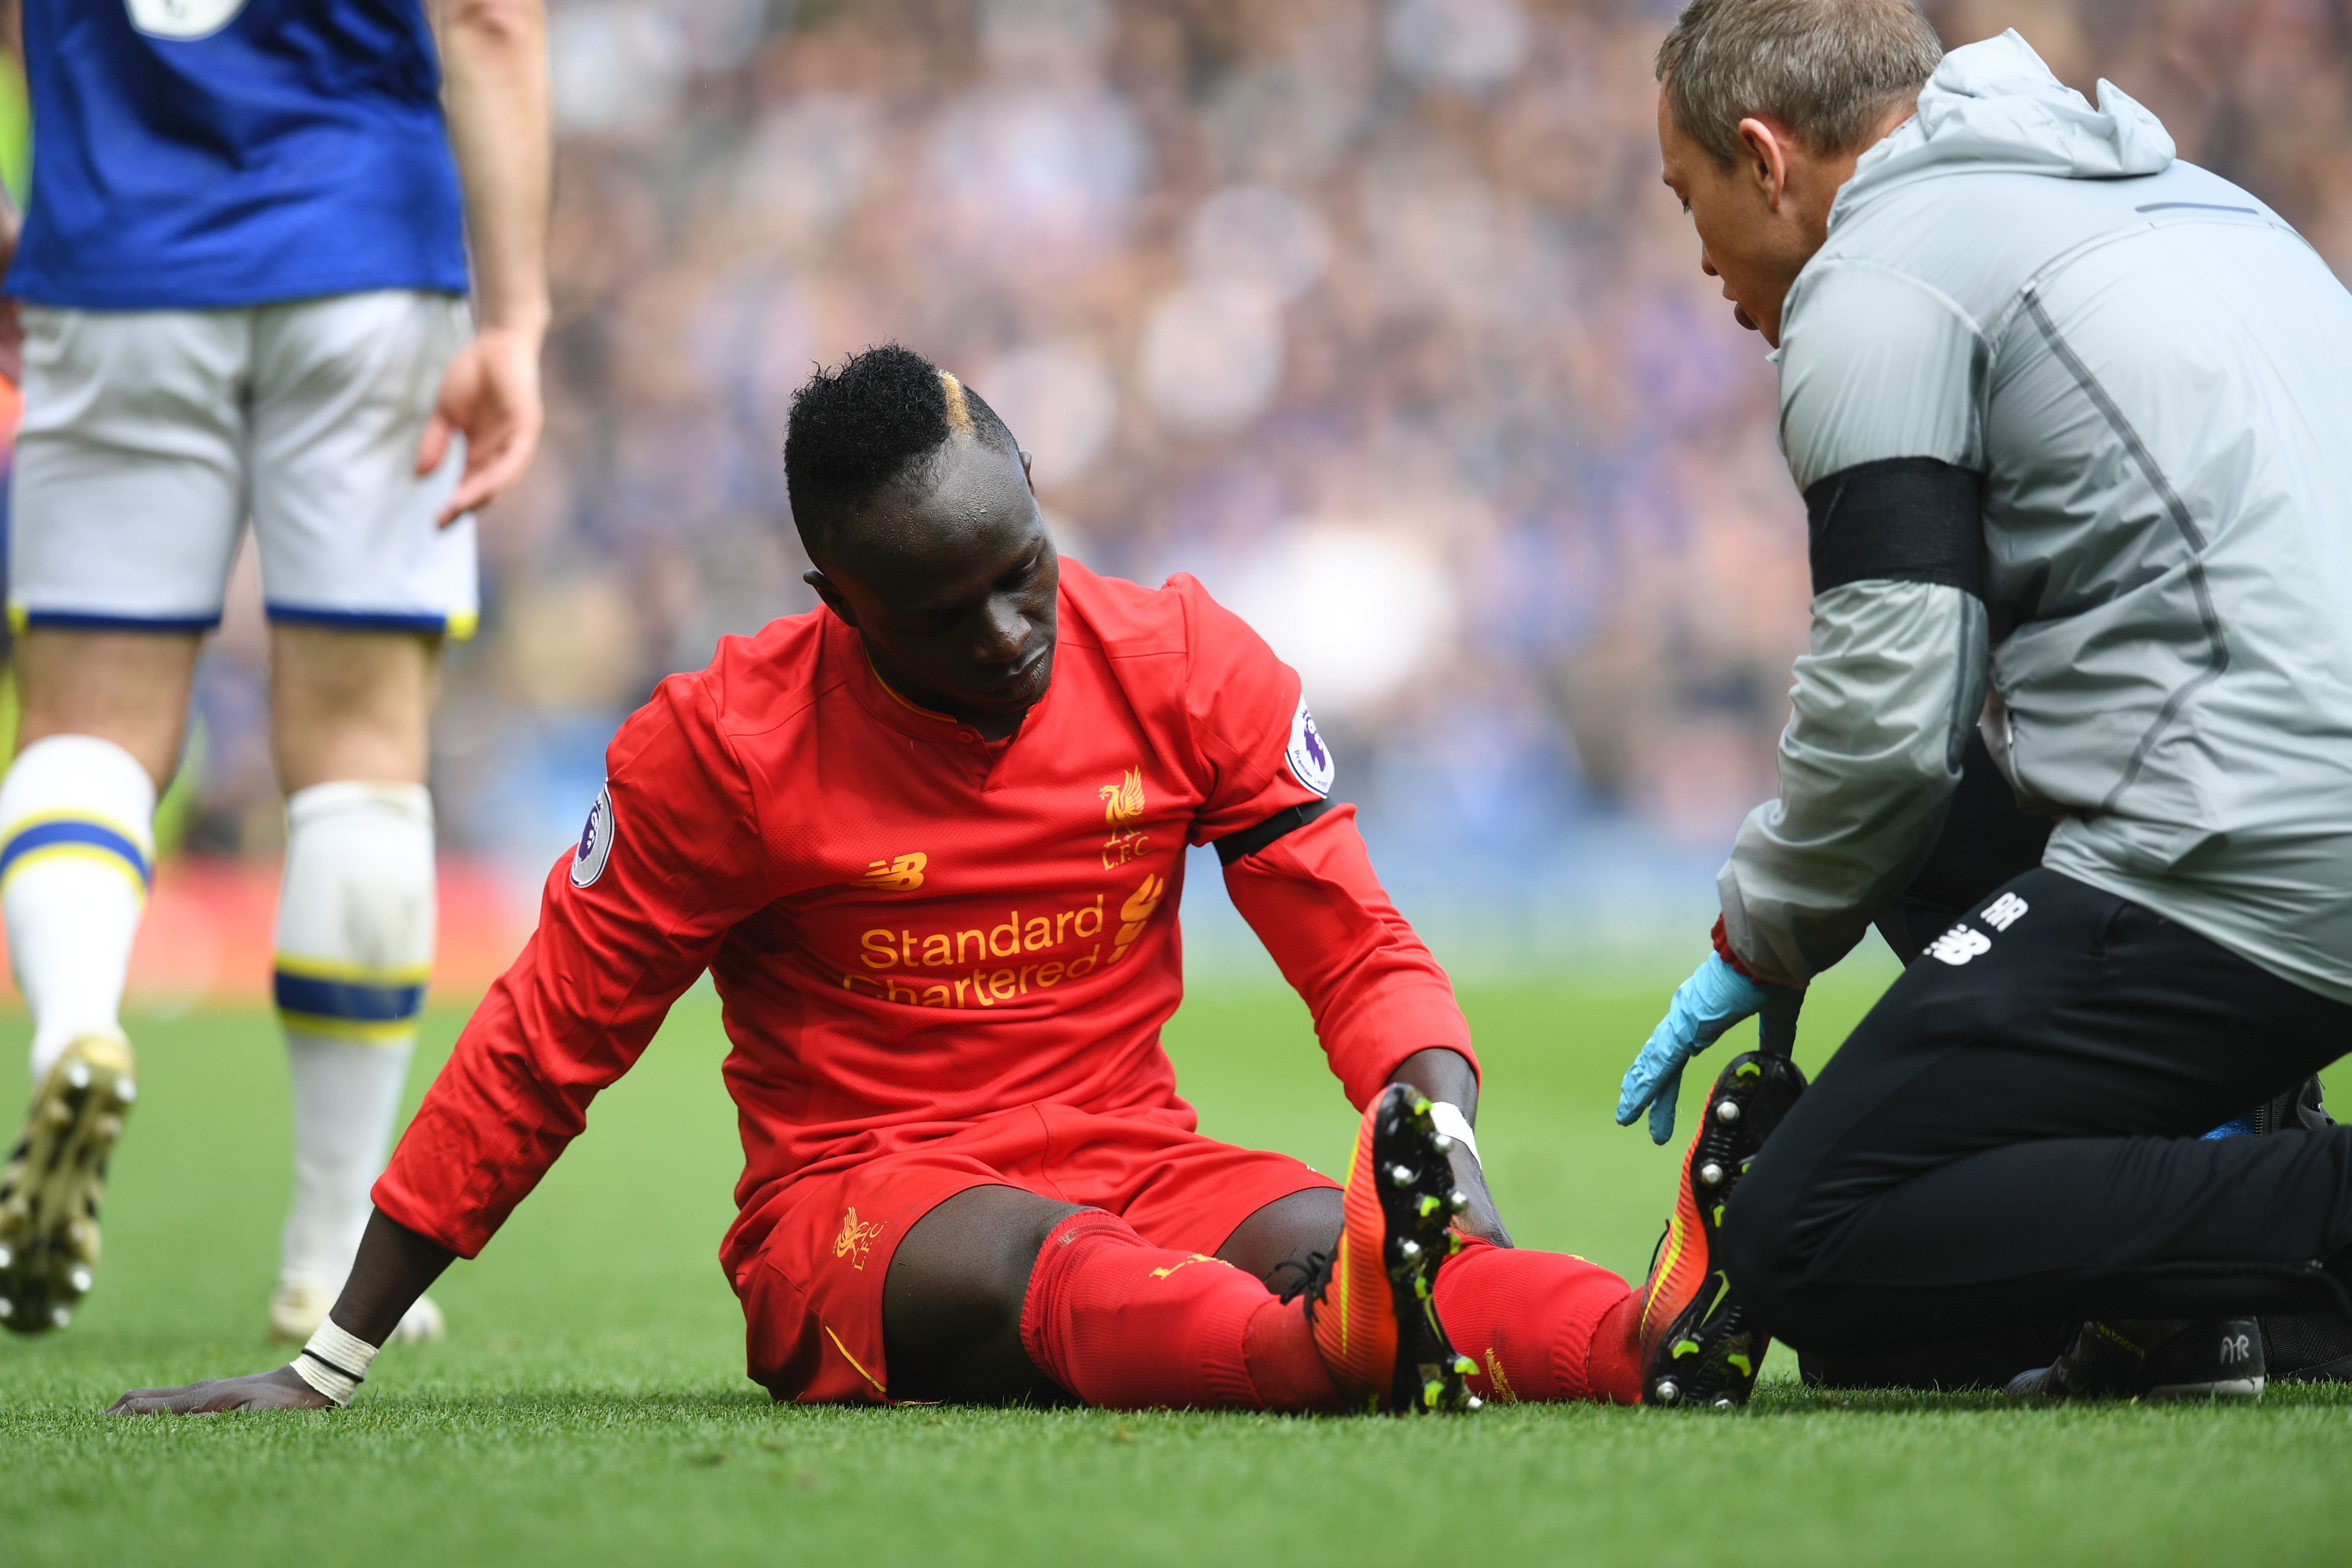 Can Liverpool pull through without Mane? (Picture Courtesy - AFP/Getty Images)